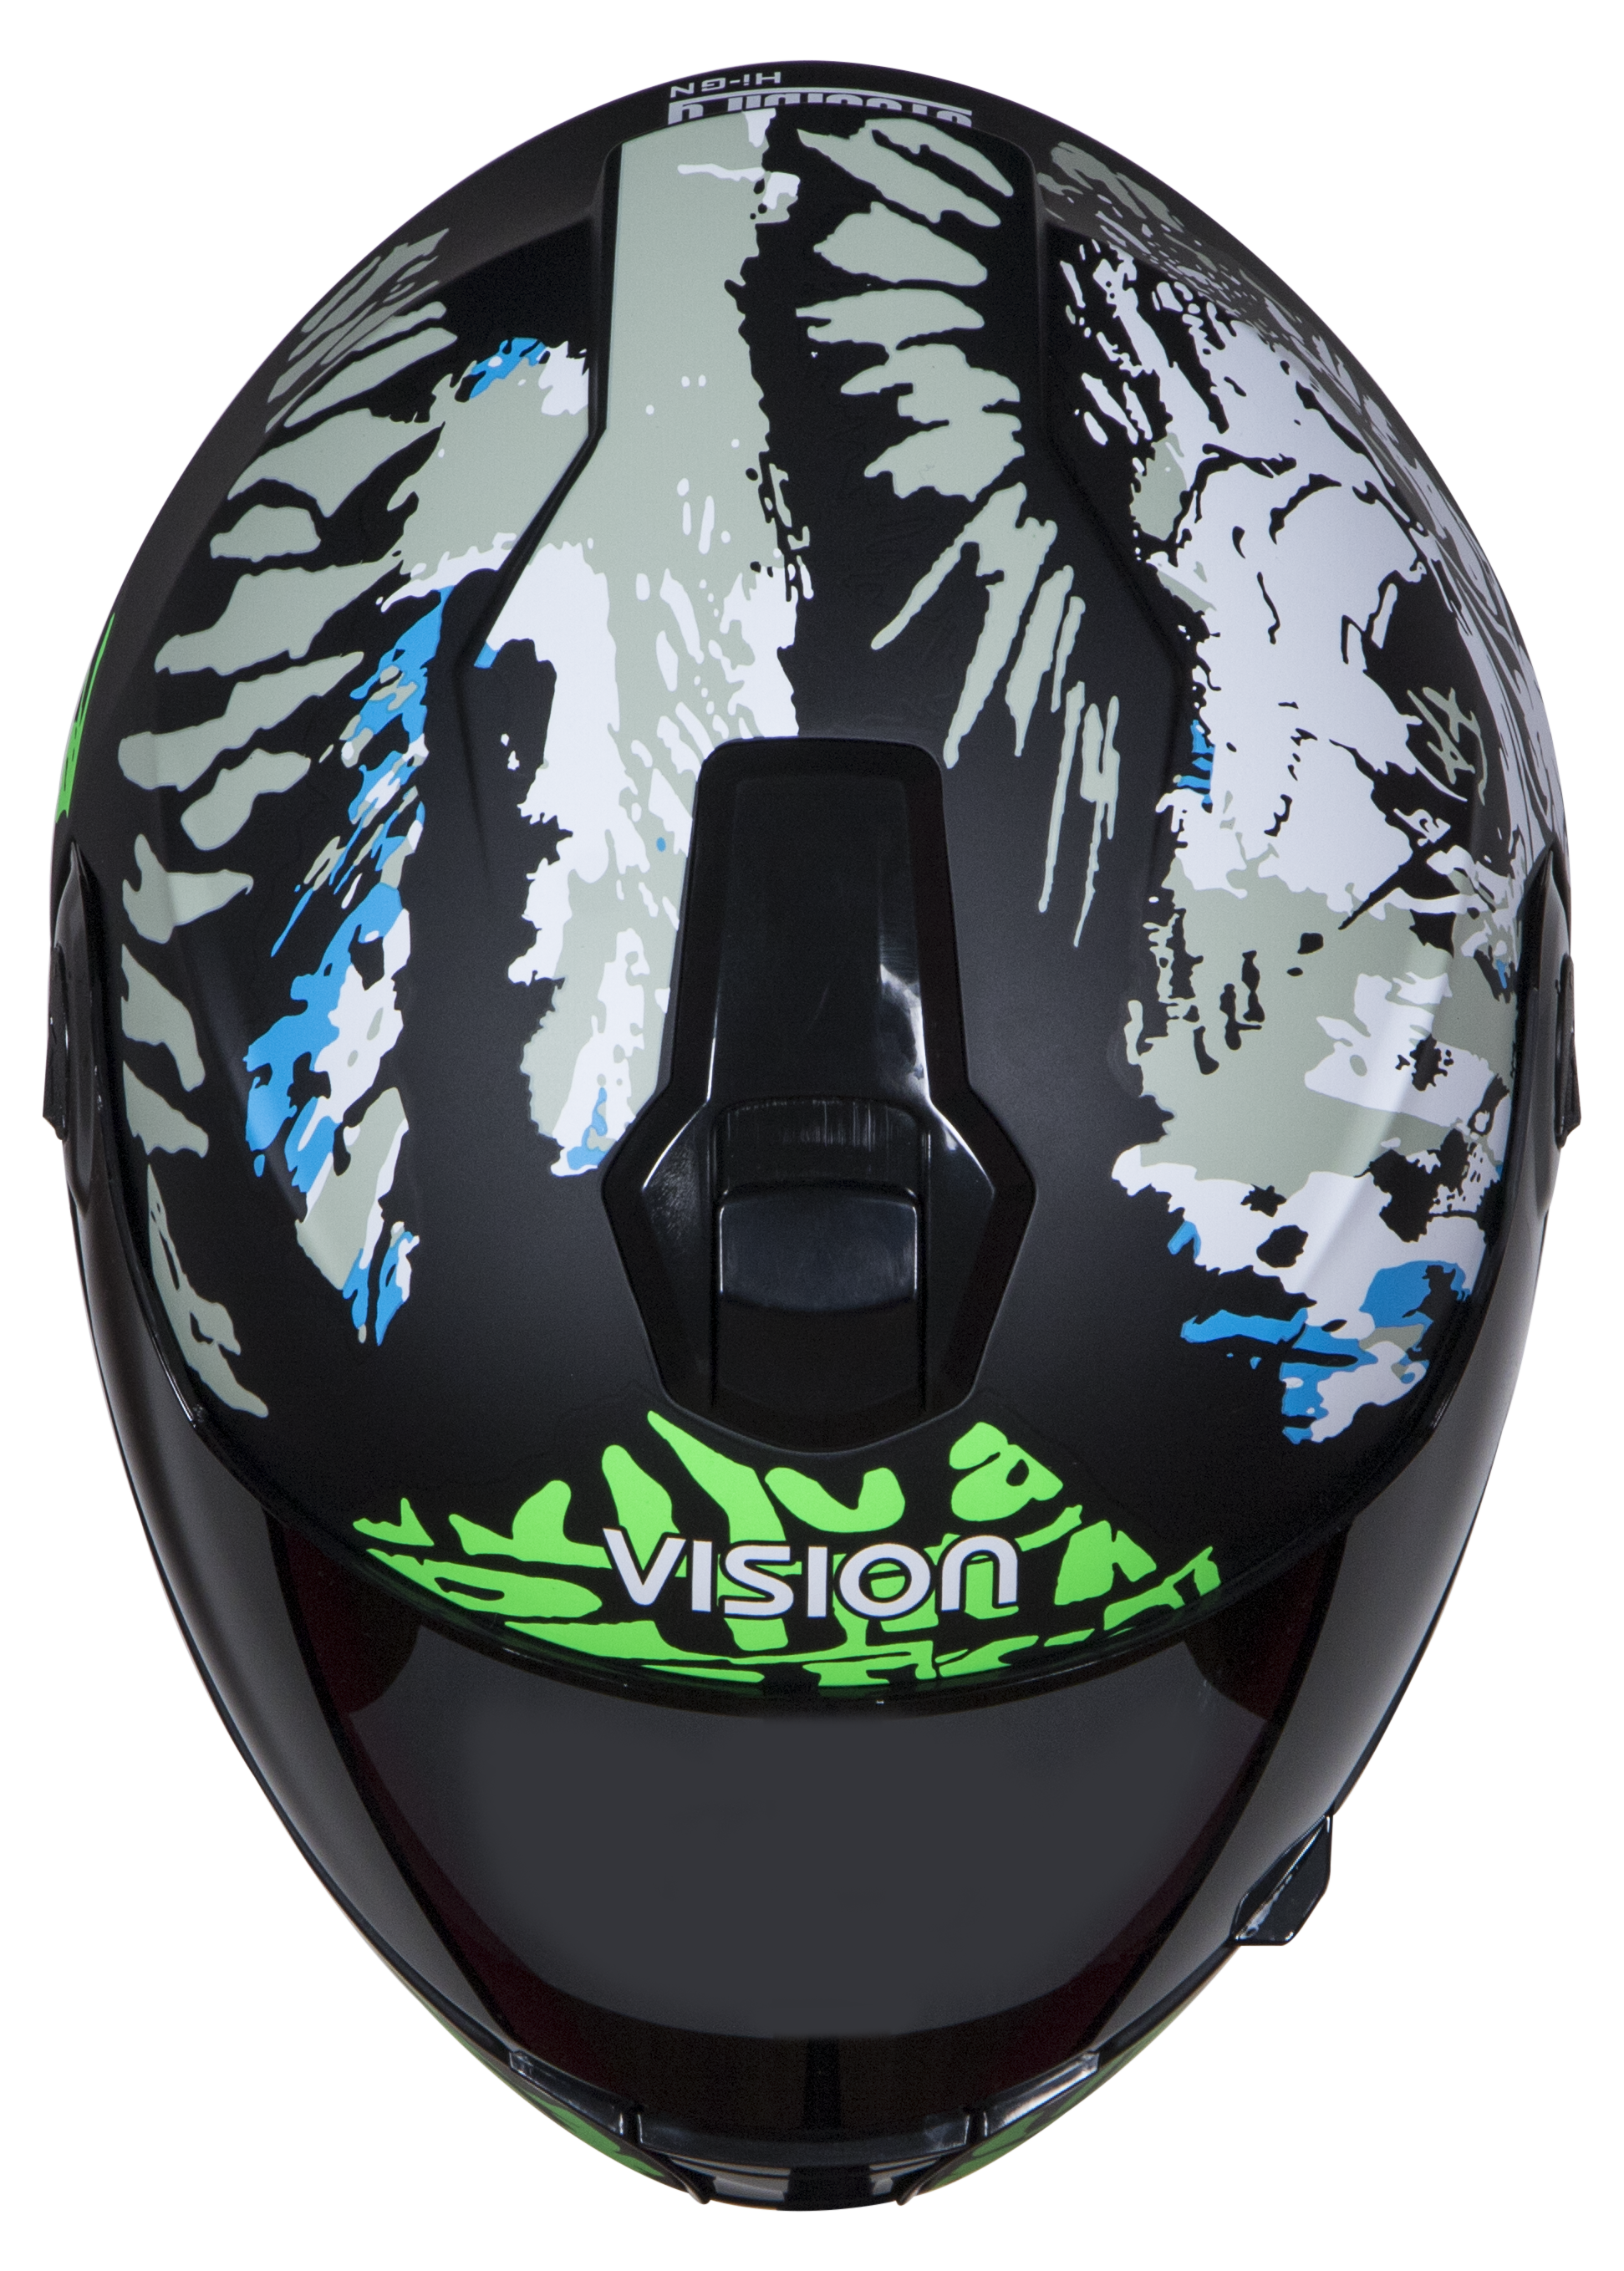 SBH-11 Vision Skull Mat Black With Battle Green( Fitted With Clear Visor Extra Smoke Visor Free)